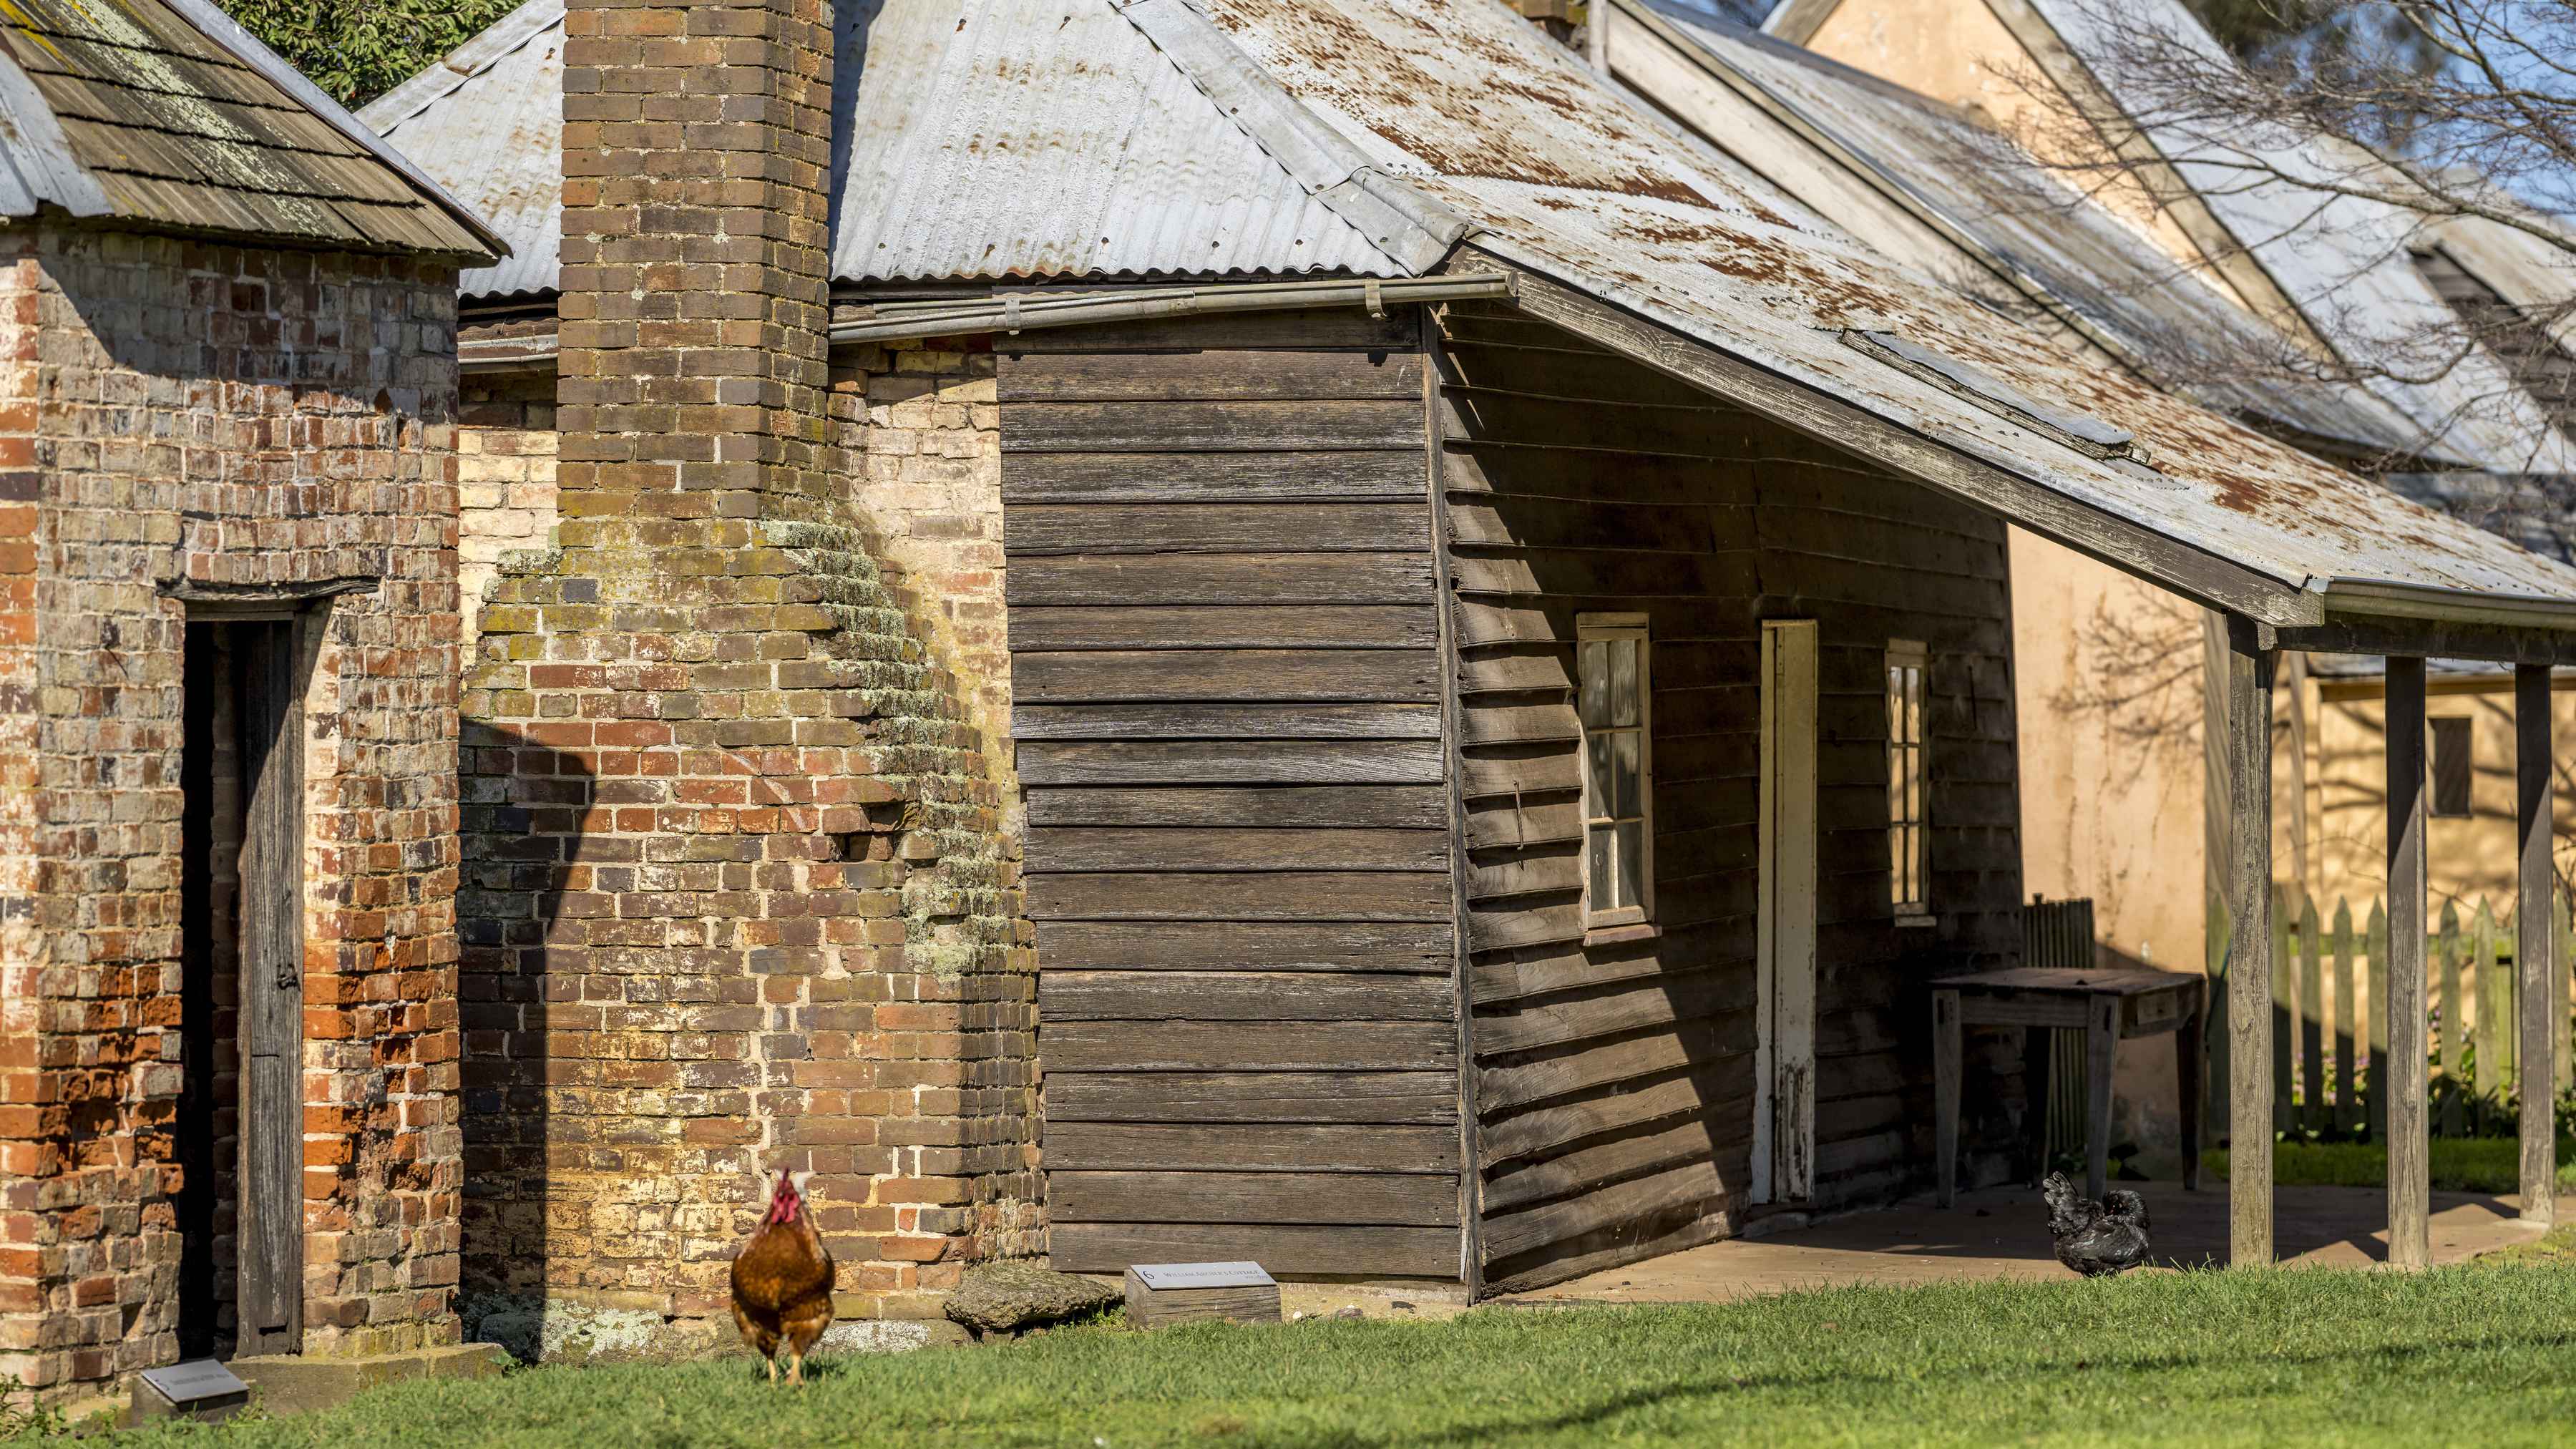 Streetscape of Farm Village with brick smokehouse, original William Archer cottage with Overseer’s cottage in background. A rooster stands in the foreground. Photo: Rob Burnett.